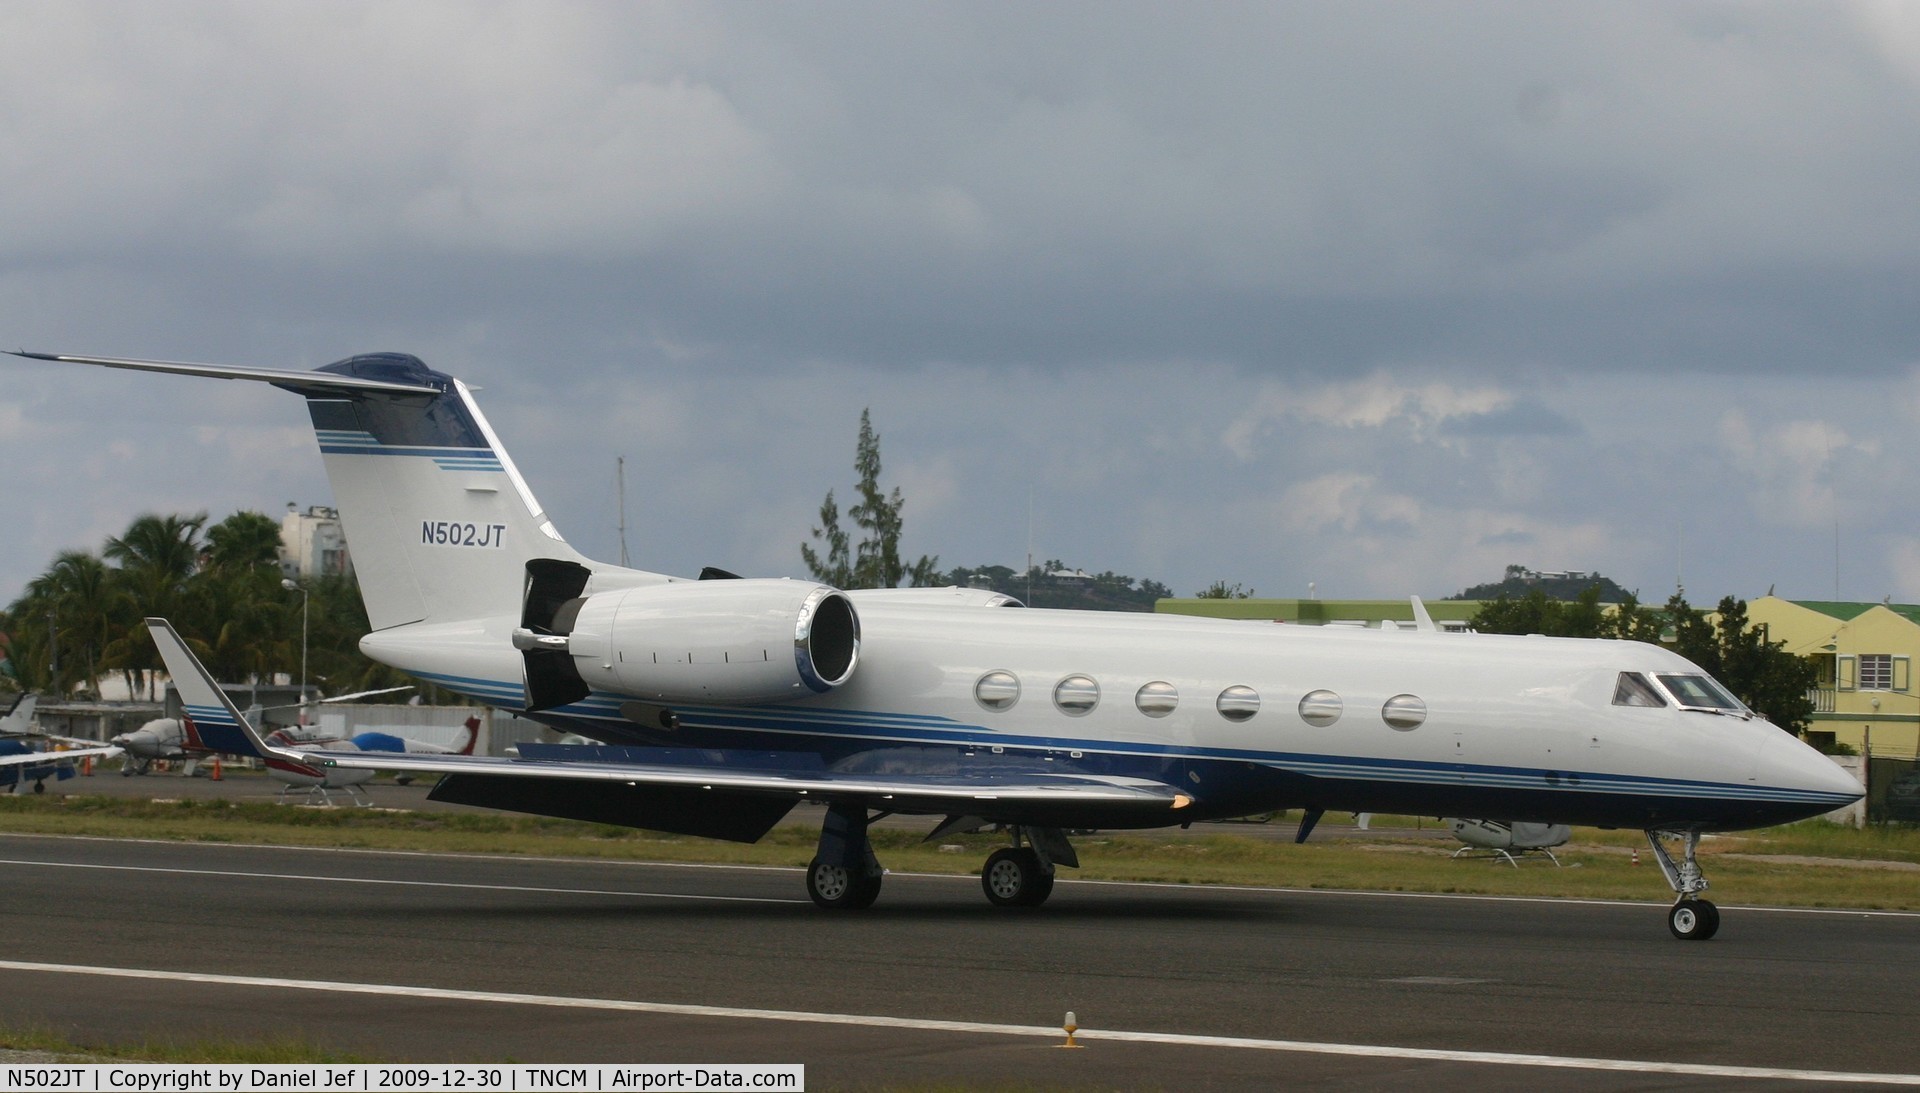 N502JT, 1993 Gulfstream Aerospace G-IV C/N 1212, N502JT just landed at TNCM and comming to a compleet stop